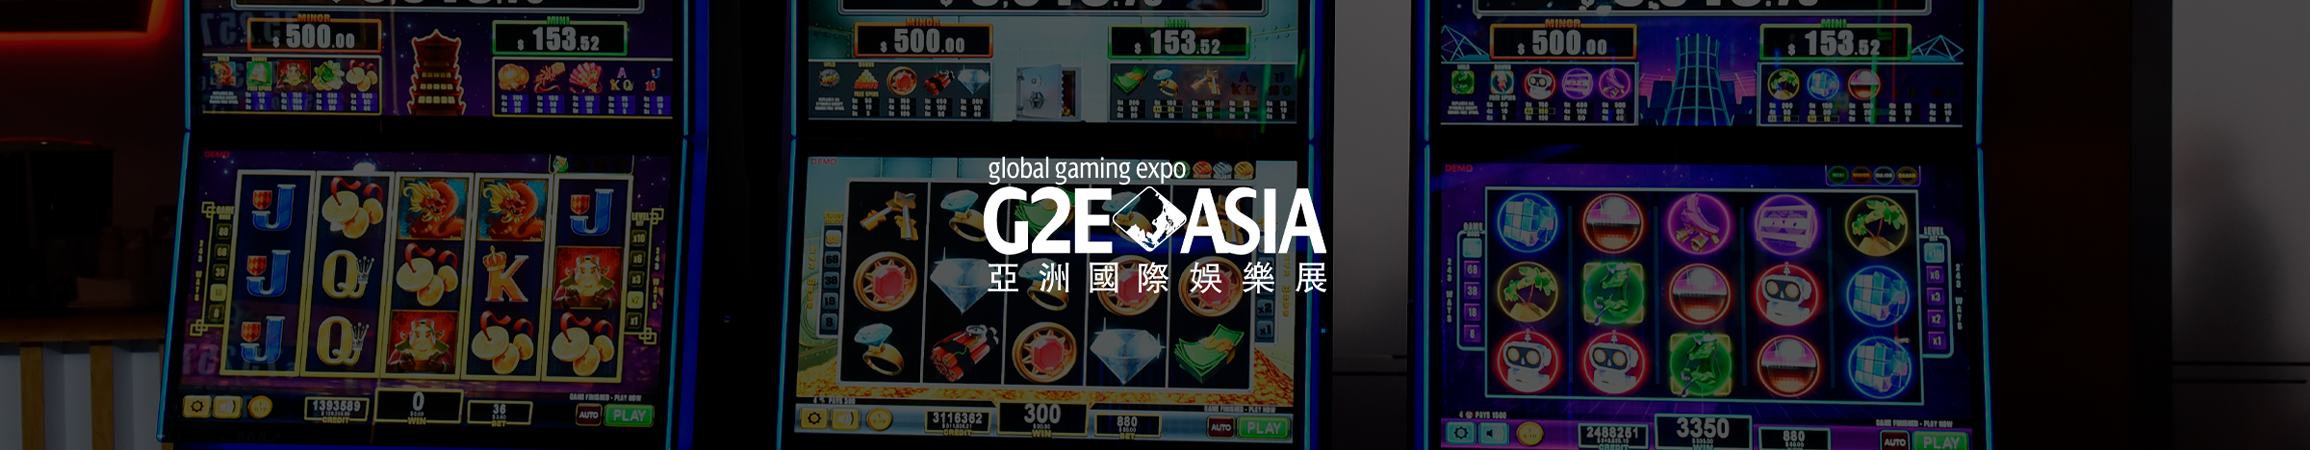 FBM is ready to go to Global Gaming Expo in Macau